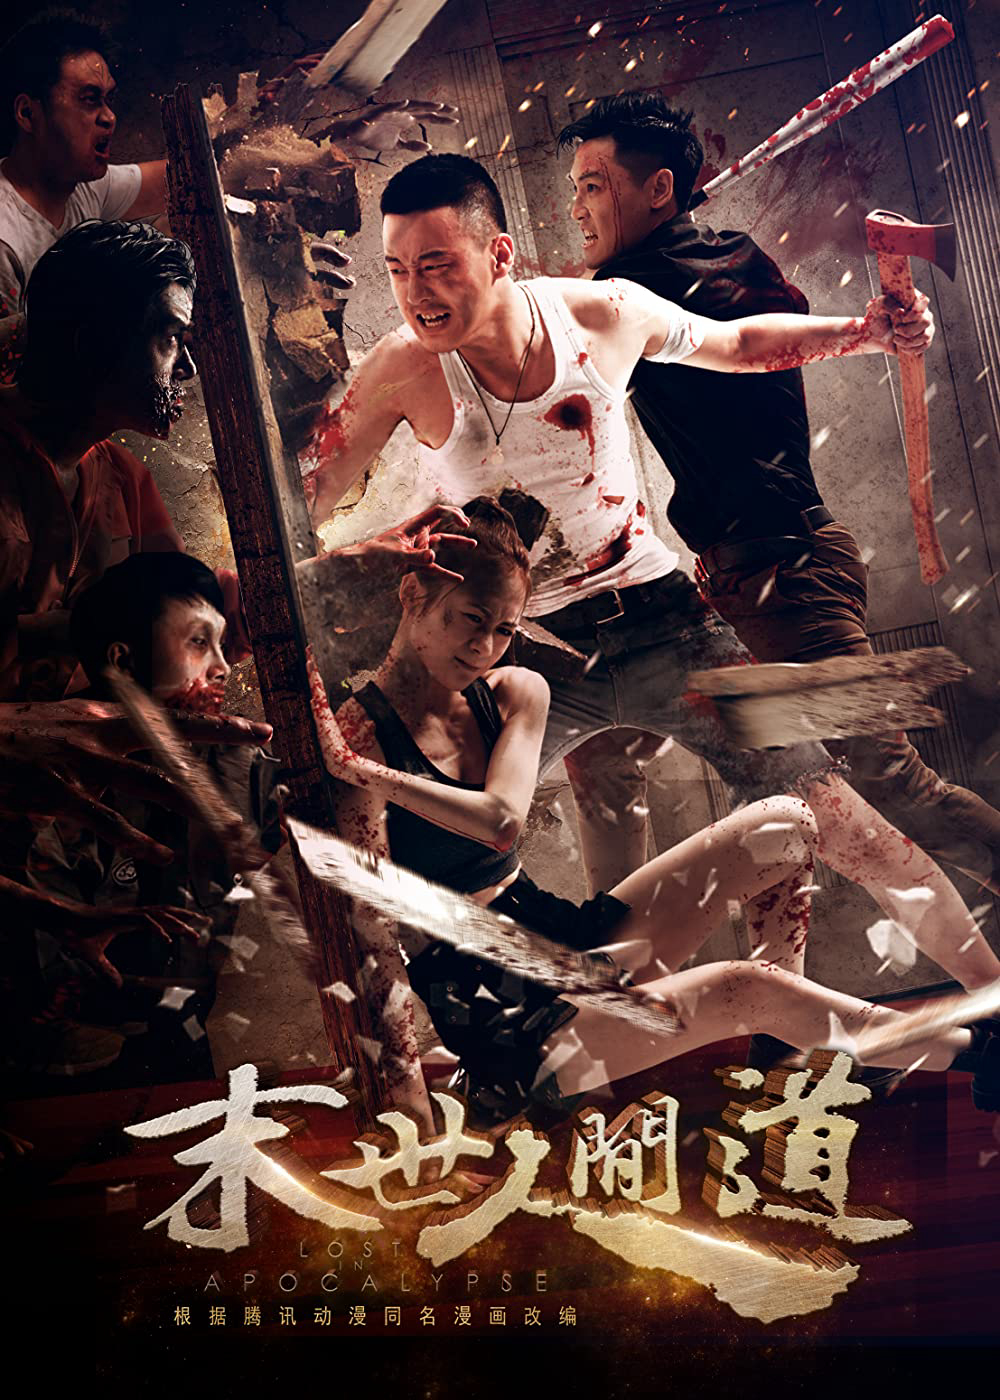 Lạc Giữa Bầy Xác Sống (Lost In Apocalypse) [2018]